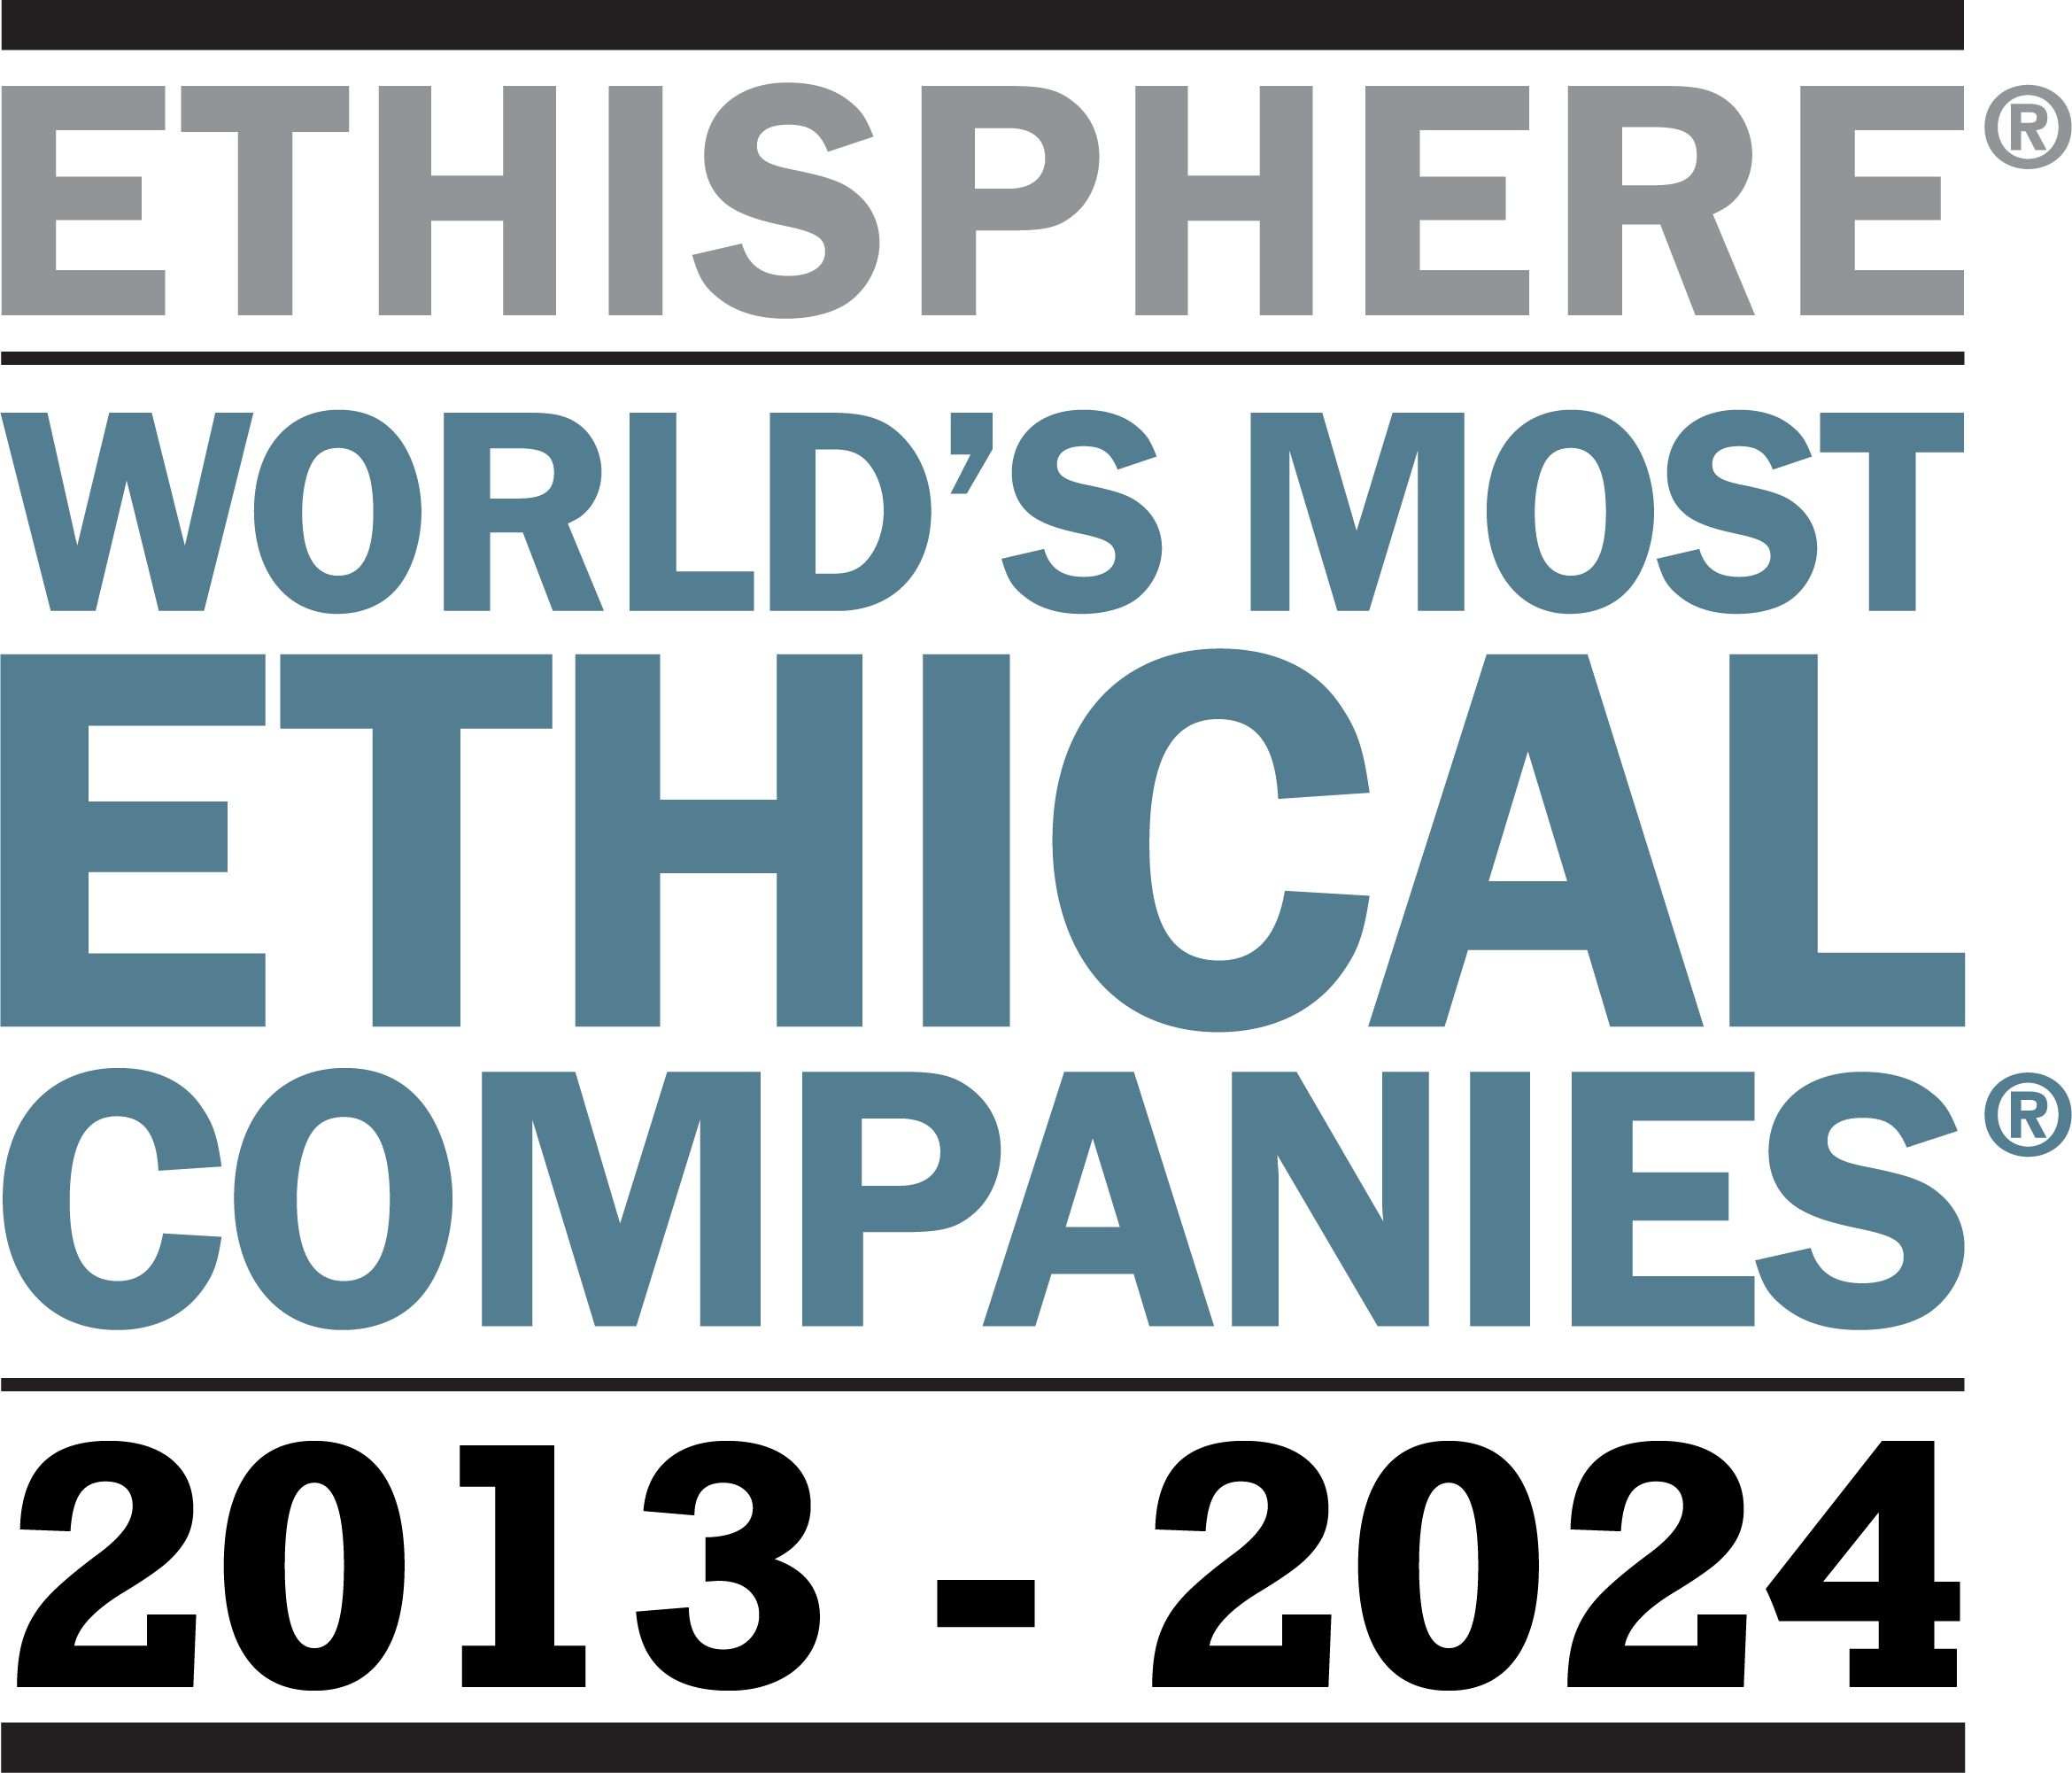 Ethisphere's World's Most Ethical Companies Logo